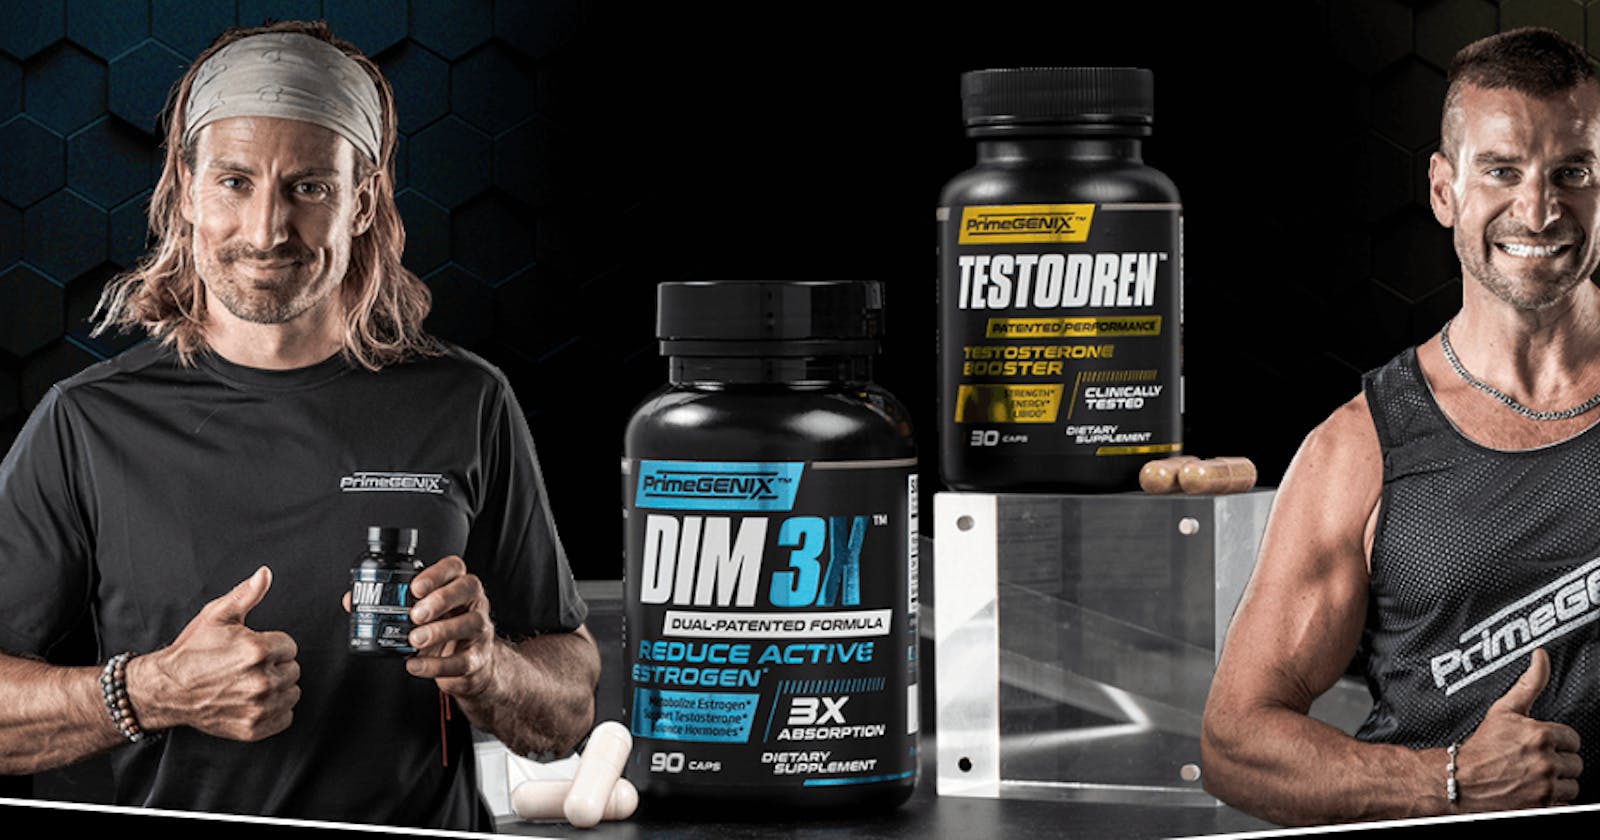 PrimeGenix (PrimeGenix DIM 3X + PrimeGenix Testodren) Double Power Muscle Growth Formula!